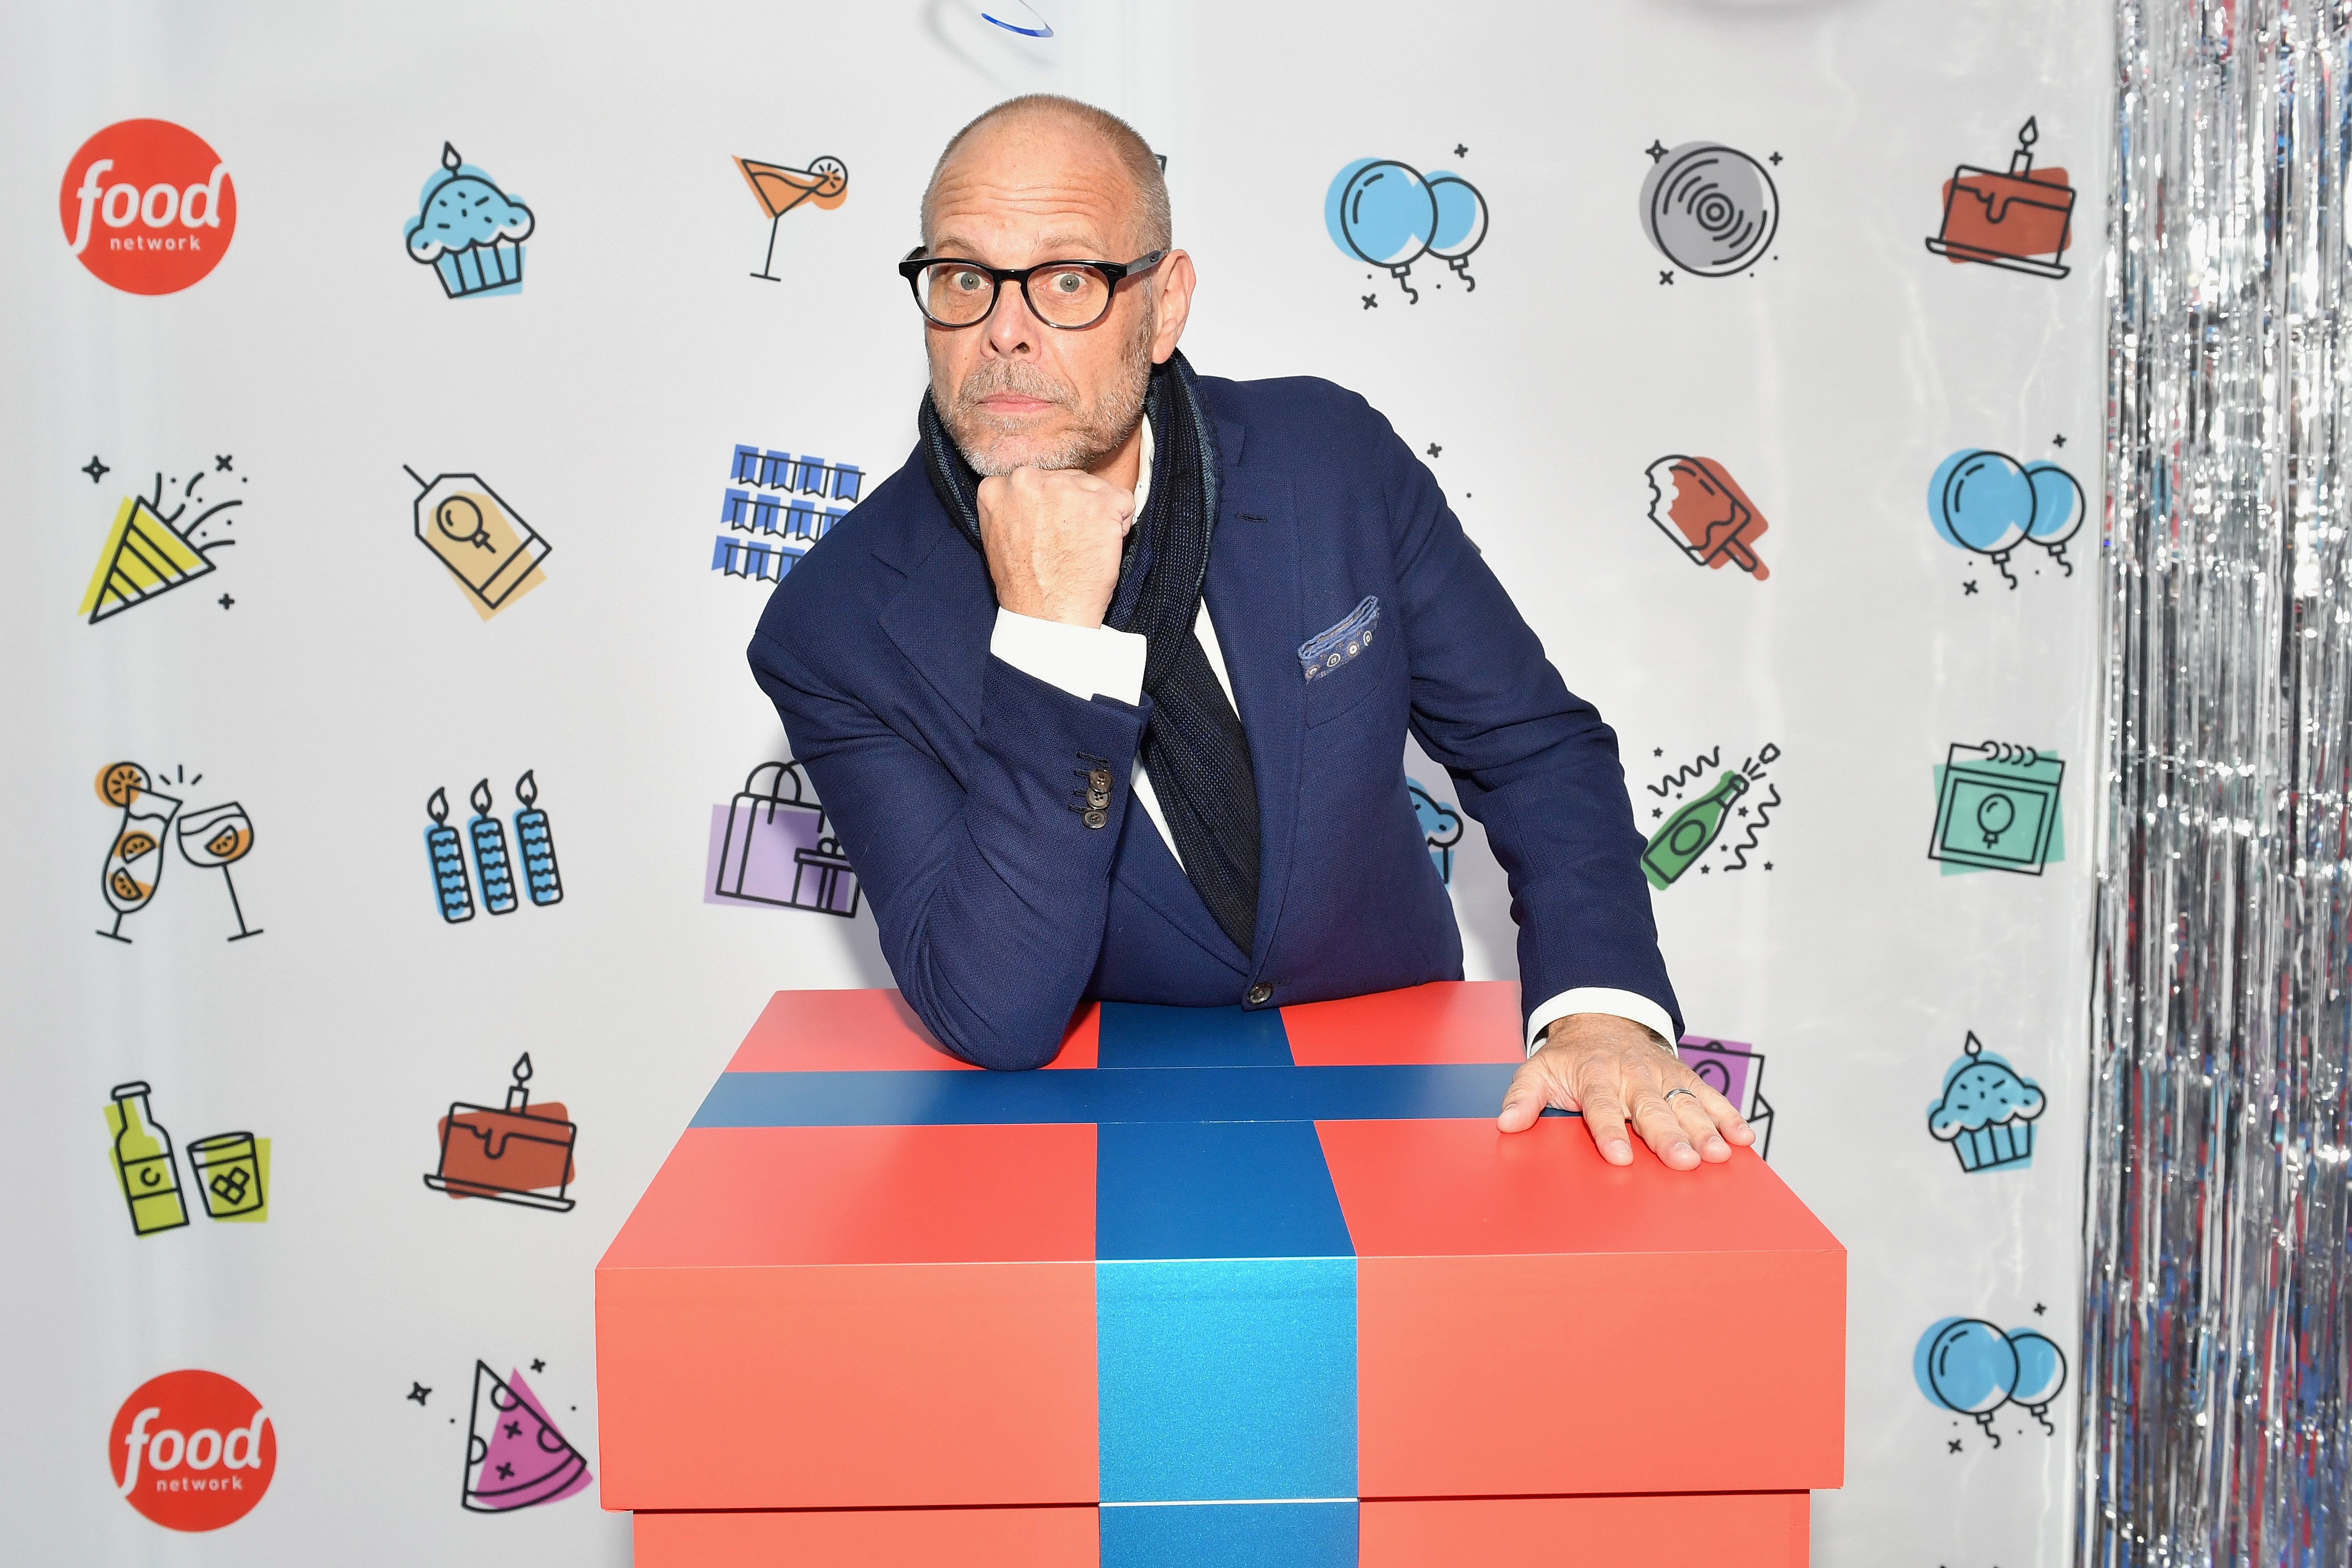 Chef Alton Brown poses with elbow on a giant wrapped gift at a 2018 Food Network event.